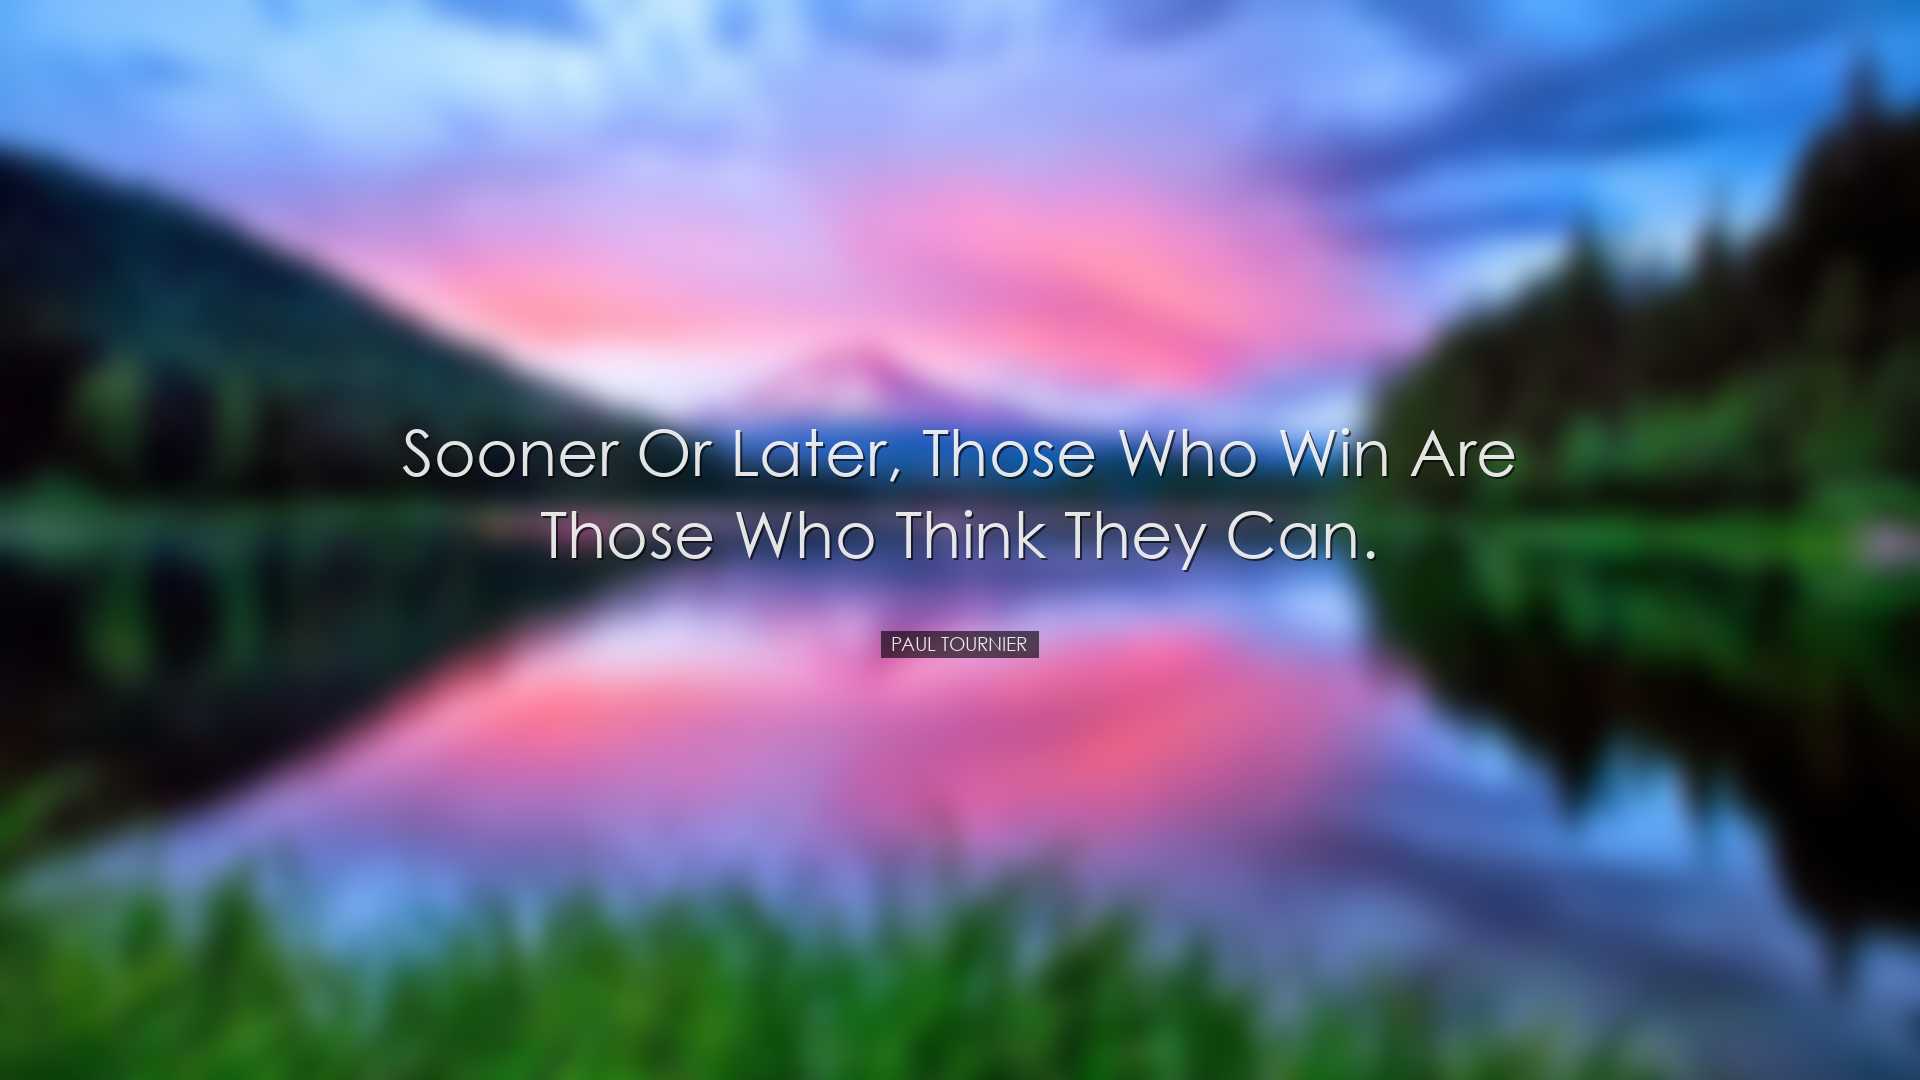 Sooner or later, those who win are those who think they can. - Pau